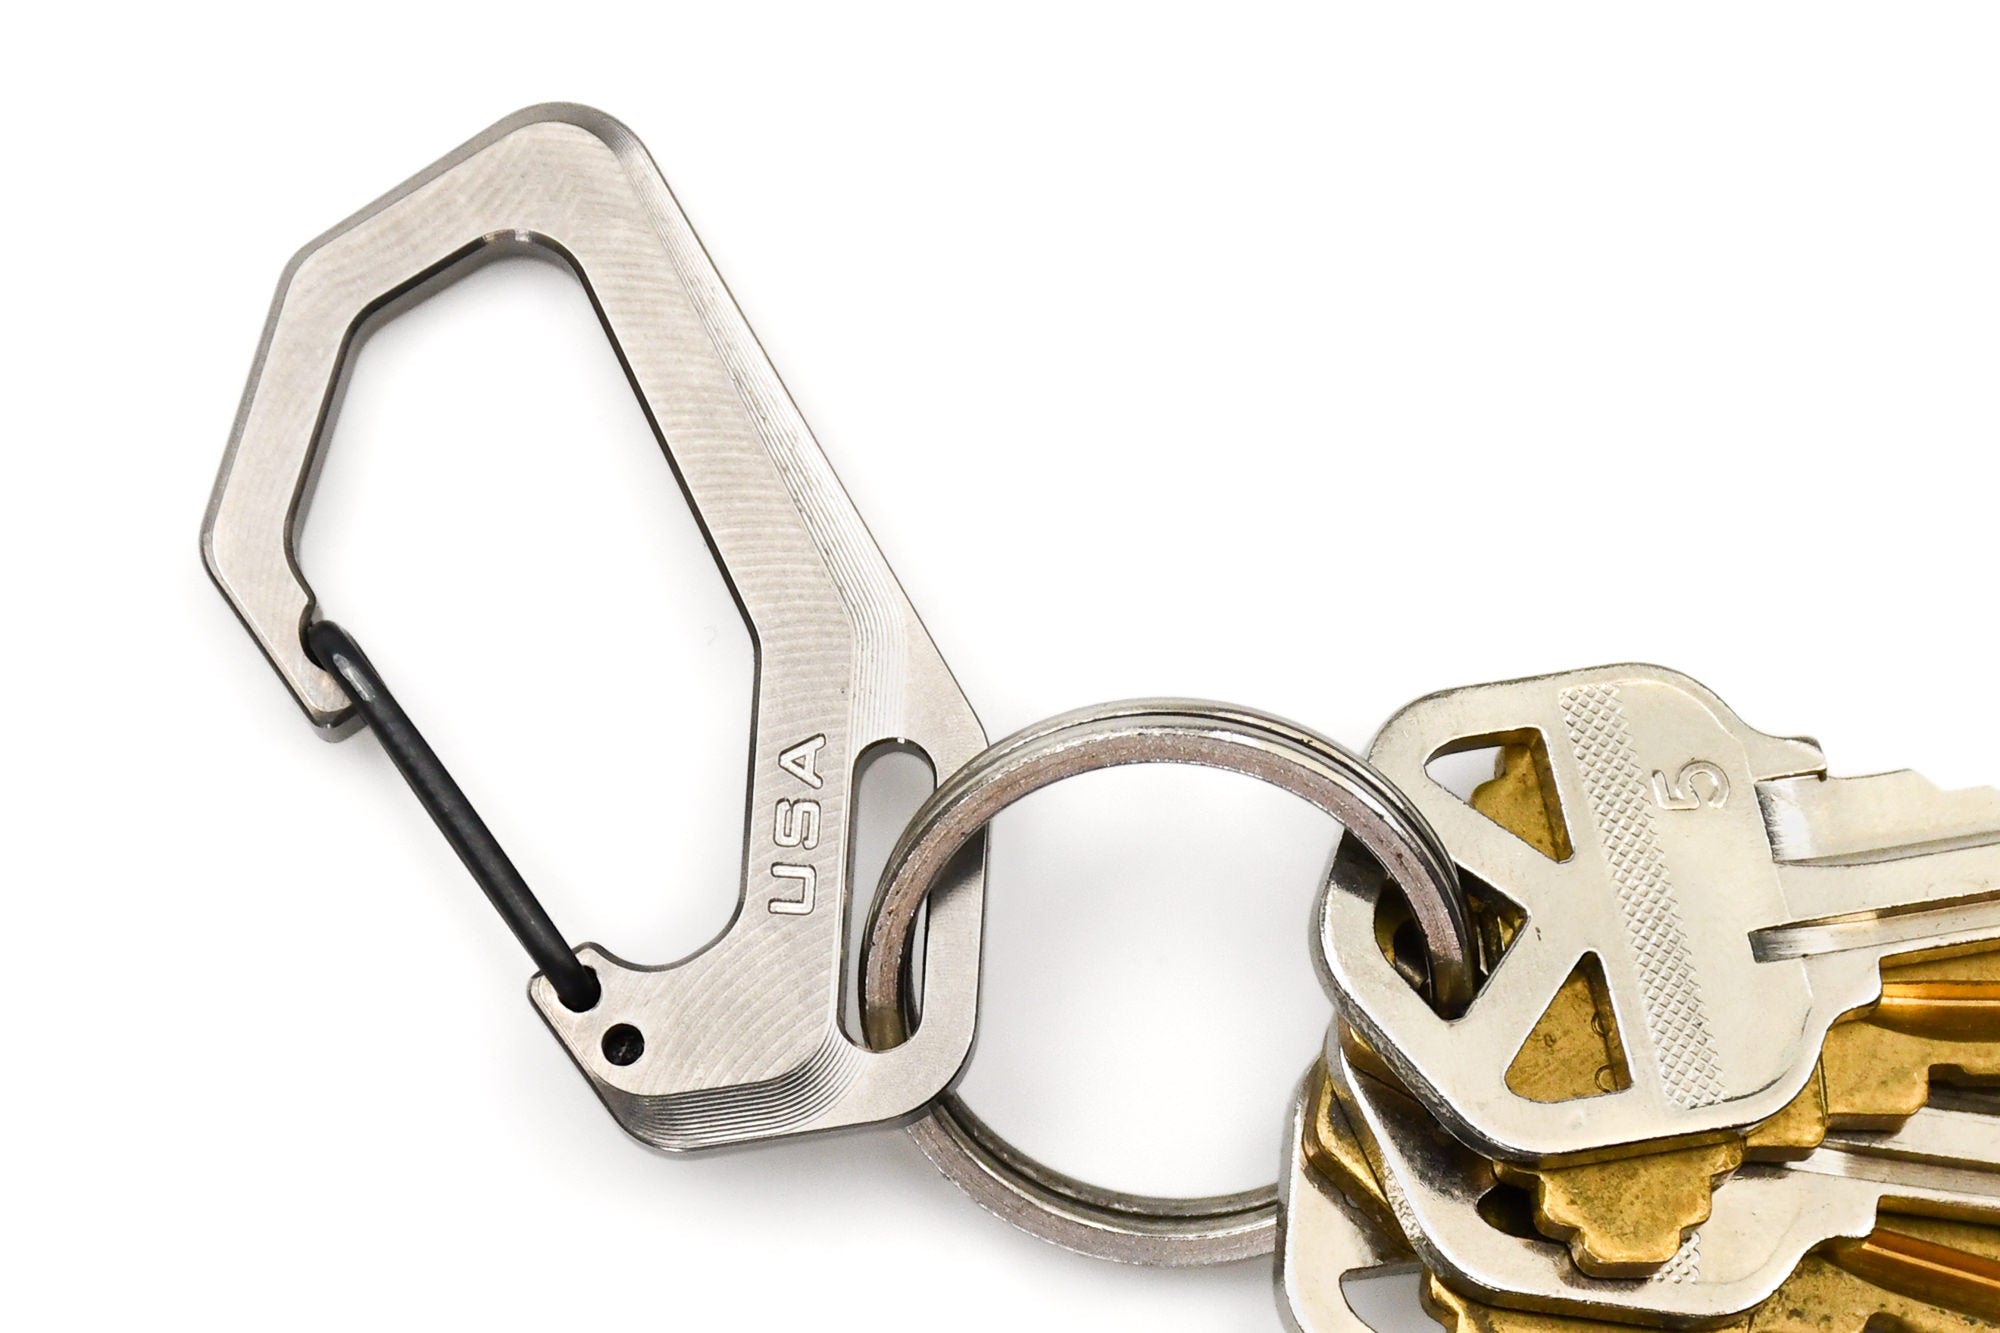 The Best EDC Carabiners for Keys